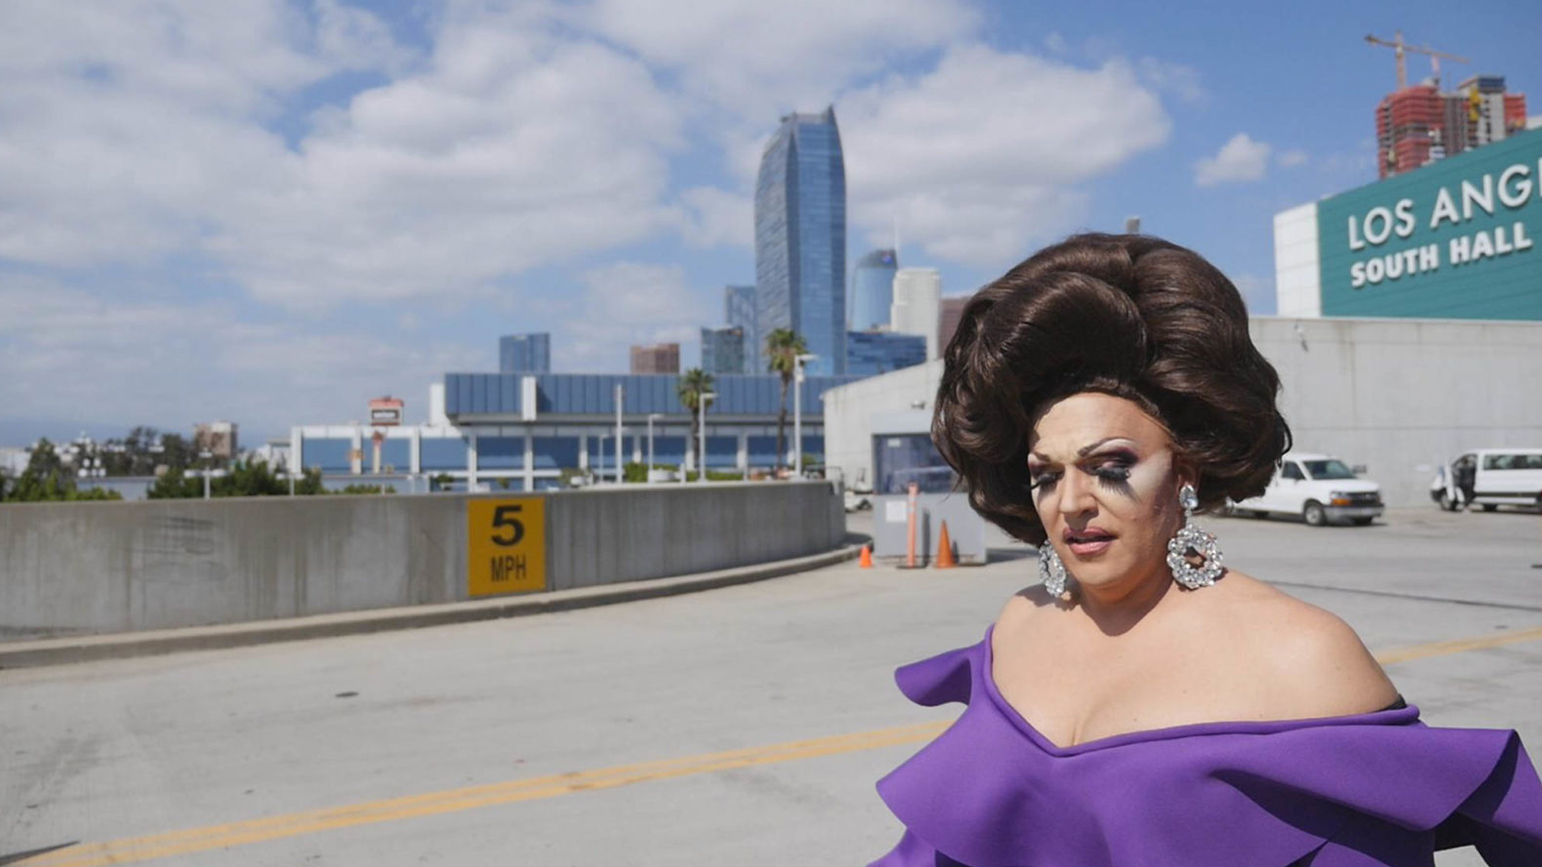 Still from the documentary "Workhorse Queen" showing a drag queen with a city skyline in the background